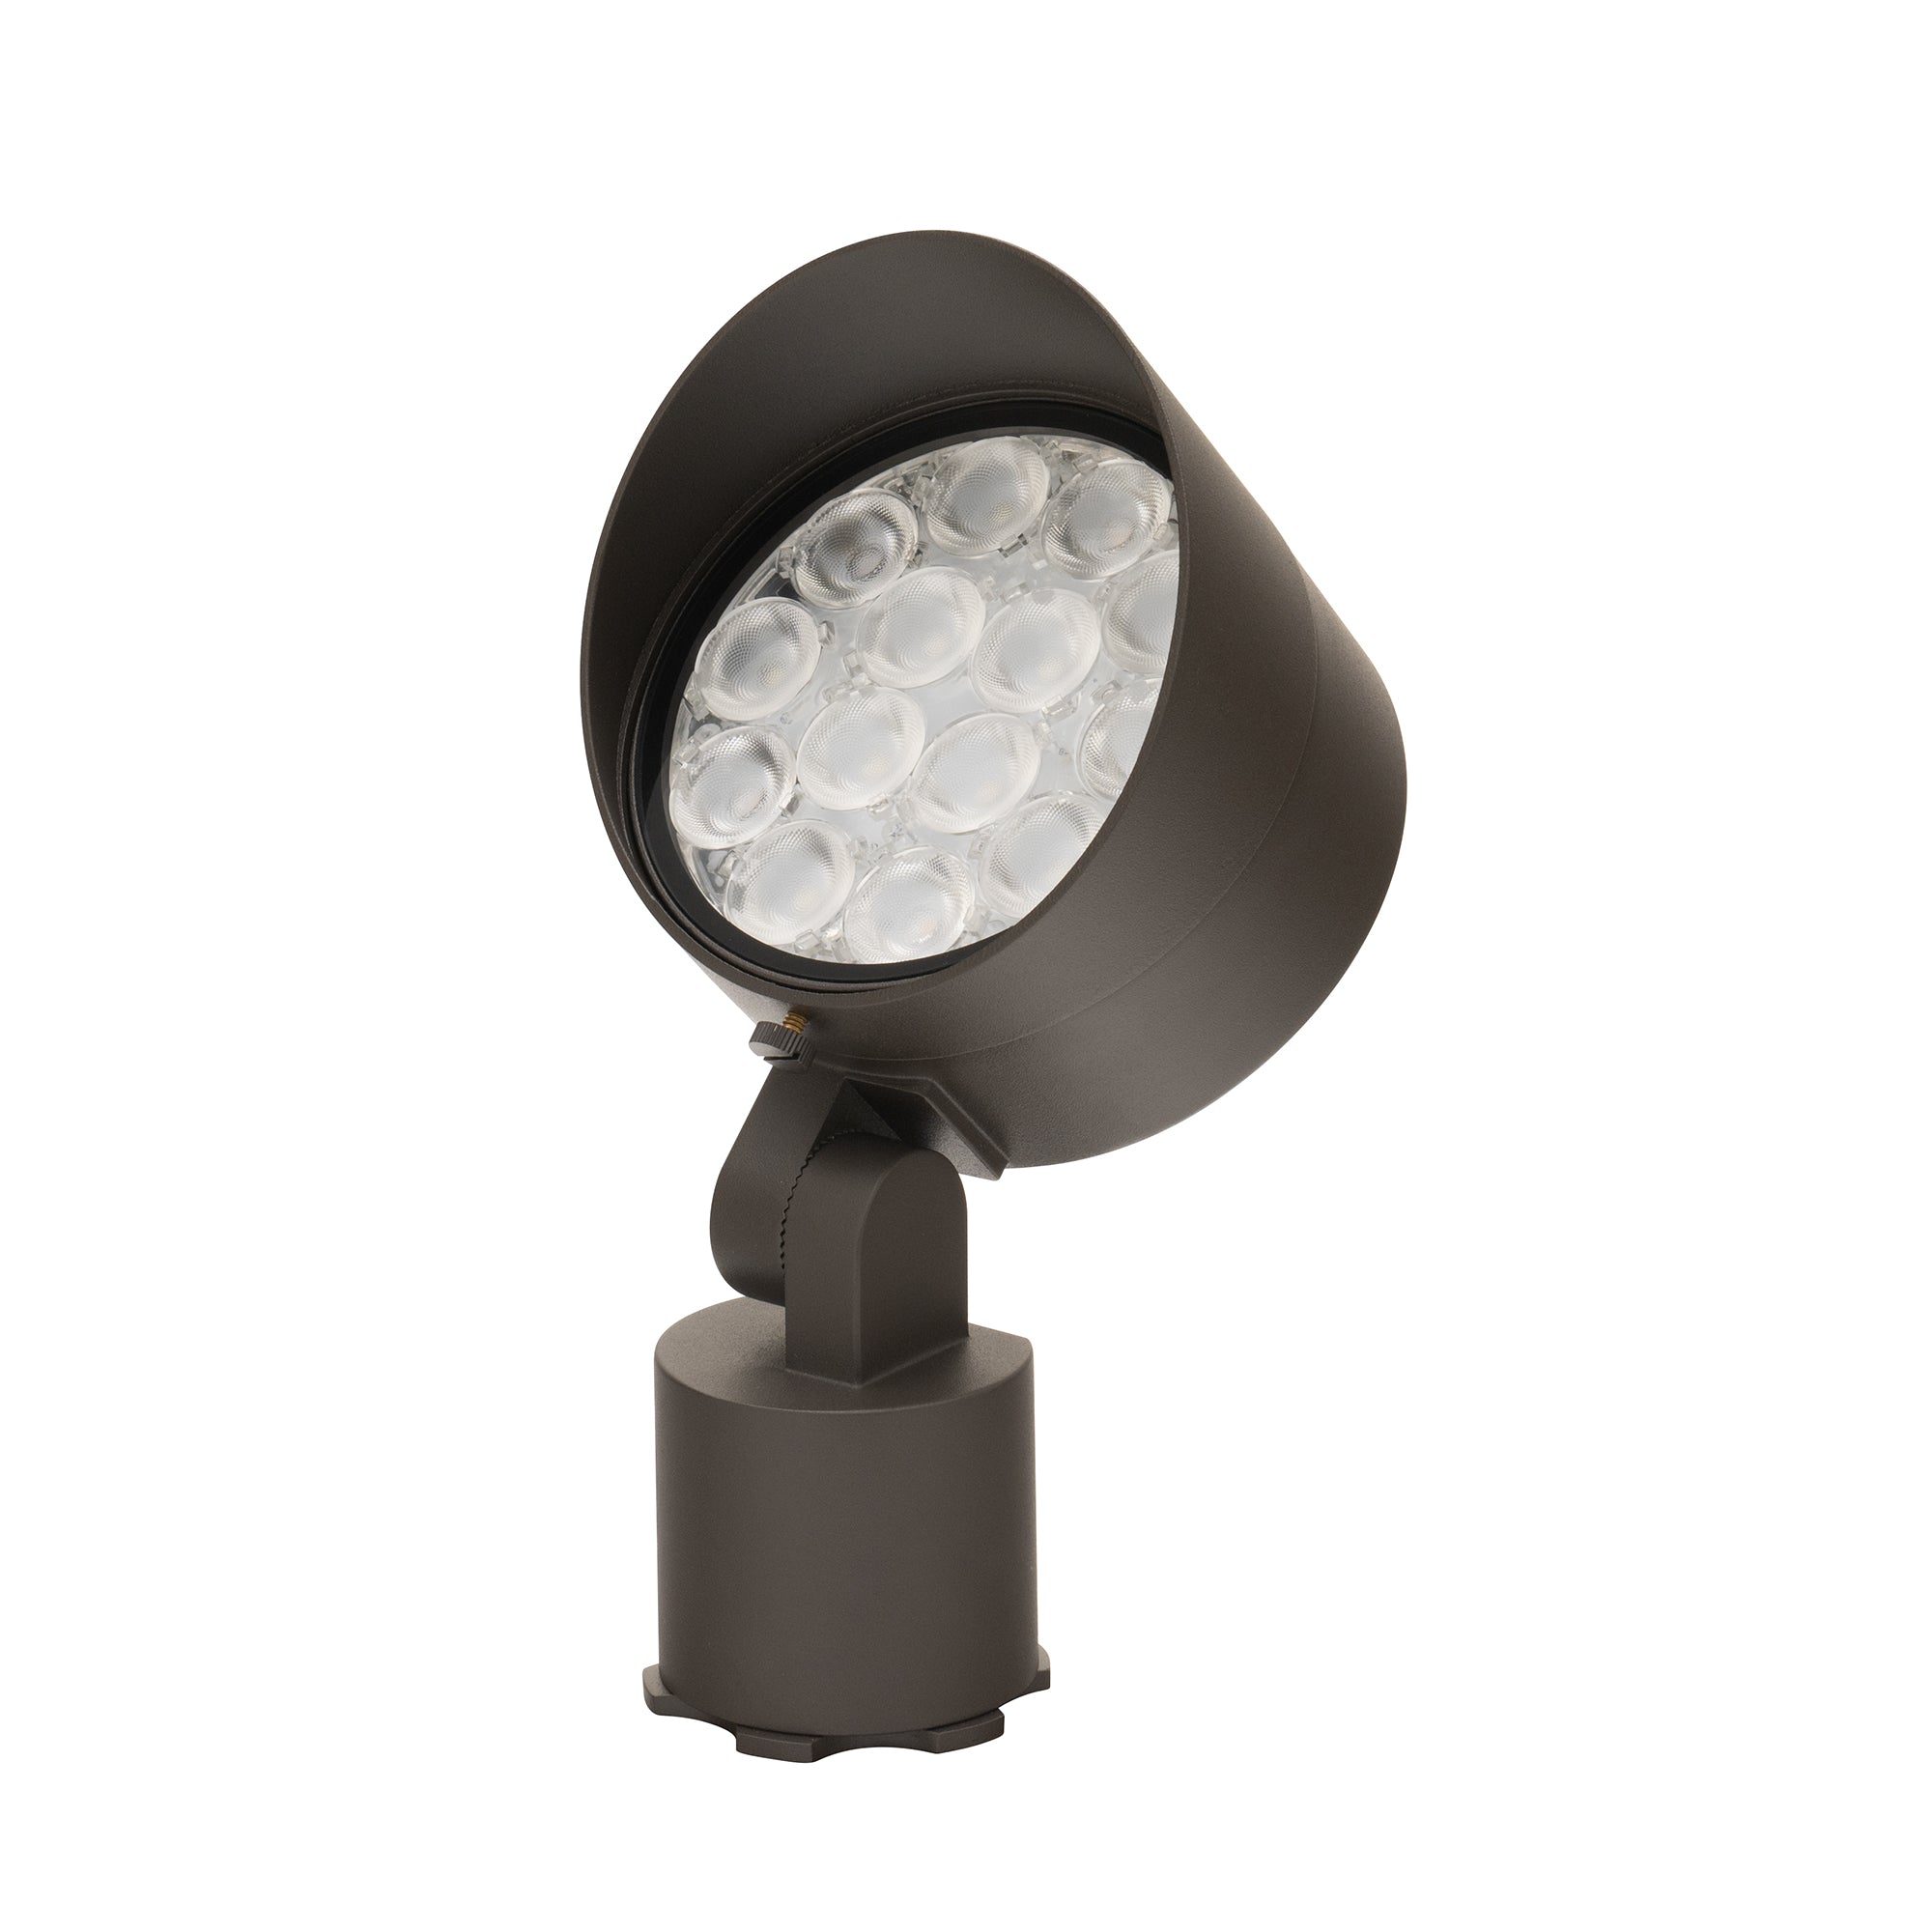 W.A.C. Canada - 5813-CSBBR - LED Landscape Accent Light - Colorscaping - Bronze On Brass